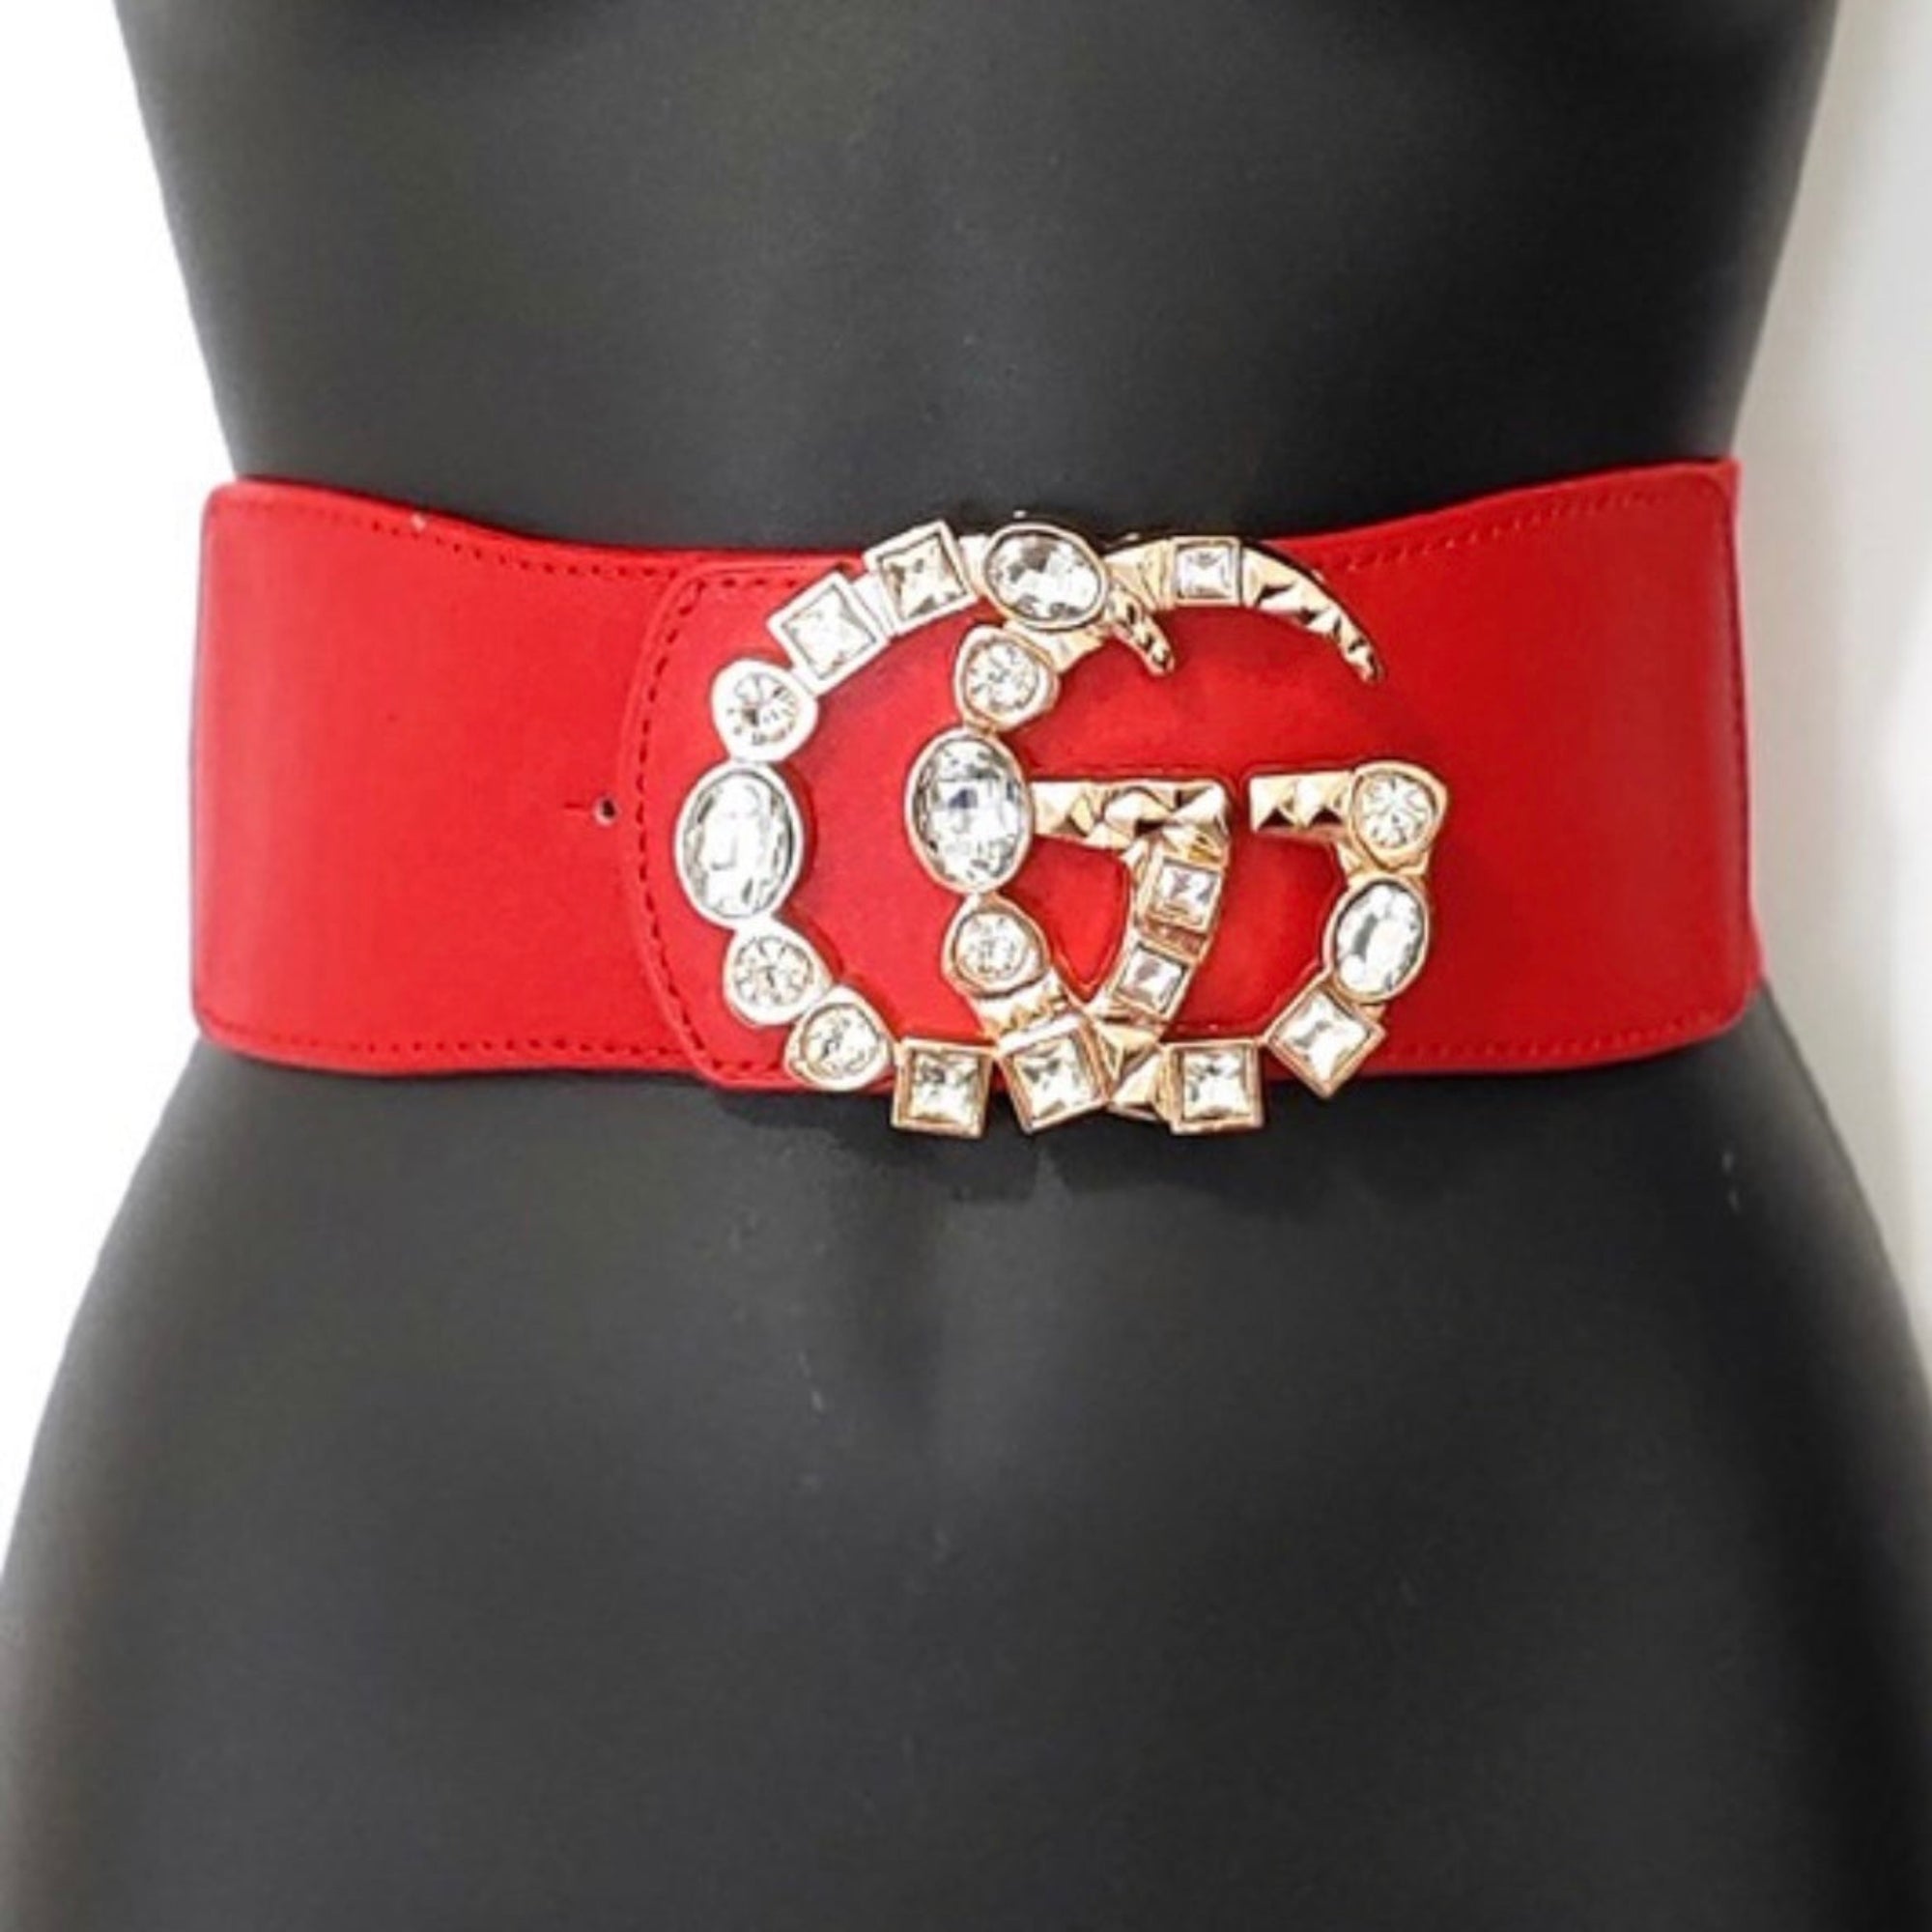 Glamour Girl Wide Elastic Fashion Belt - The Closet Connect Boutique